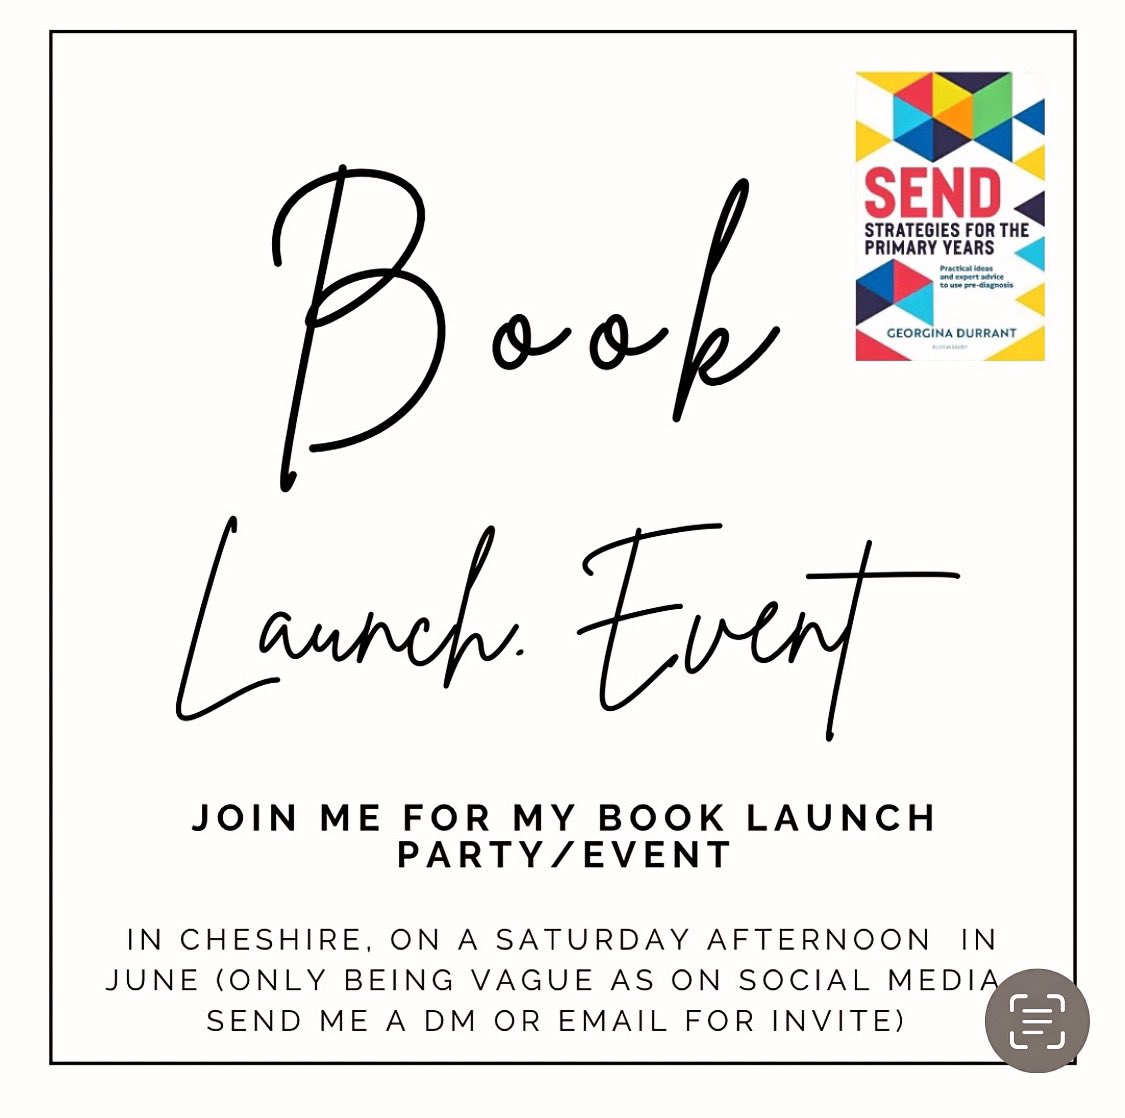 RSVPs If you’re coming to my book launch, please make sure you’ve rsvped. Thanks! (If you’d like to come & haven’t asked for an invite yet, there’s still time- send me a DM/email for more details)